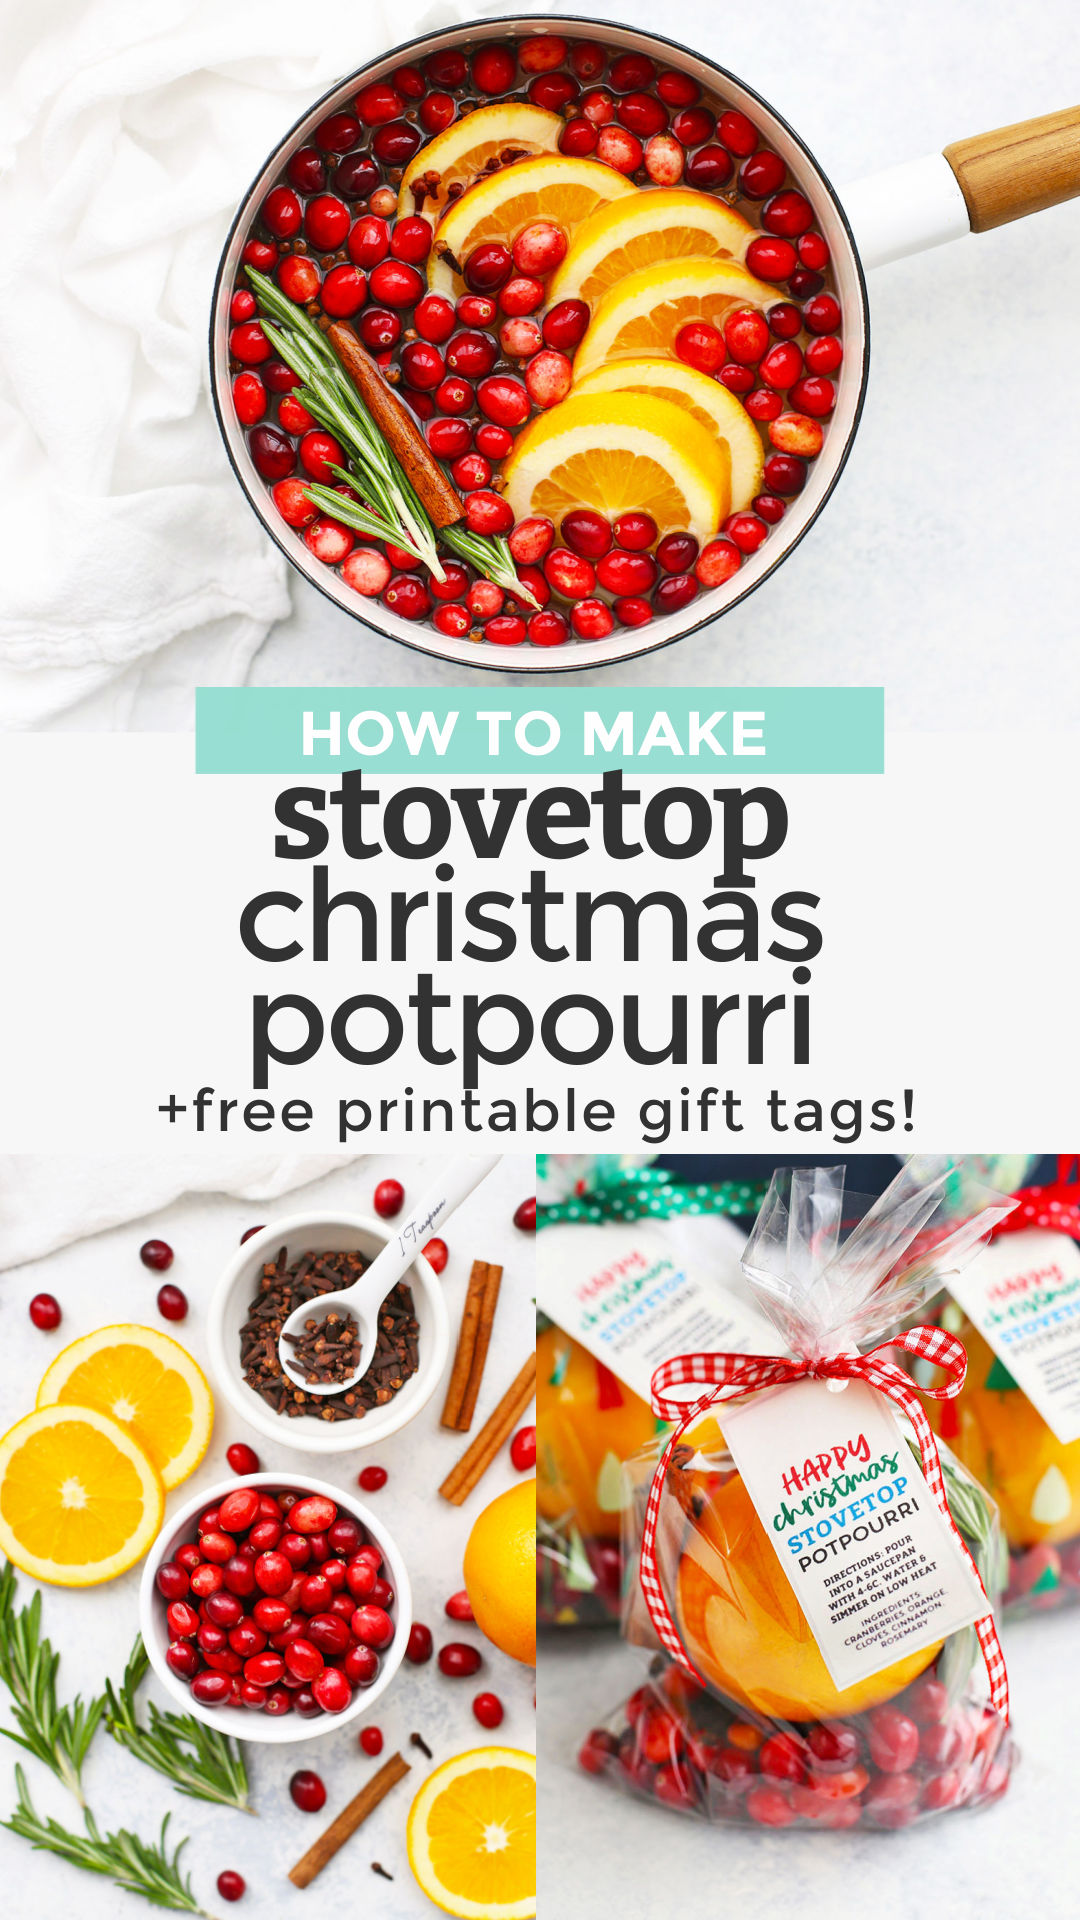 How to Make Stovetop Christmas Potpourri - This holiday potpourri recipe is like bottling up the Christmas smell! It's a great way to make your home smell like the holidays and makes a fantastic gift. Click for a how-to video and FREE PRINTABLE gift tags for gifting! #freeprintable #gifttags #printablegifttags // gift tags // free printable gift tags // free Christmas printable